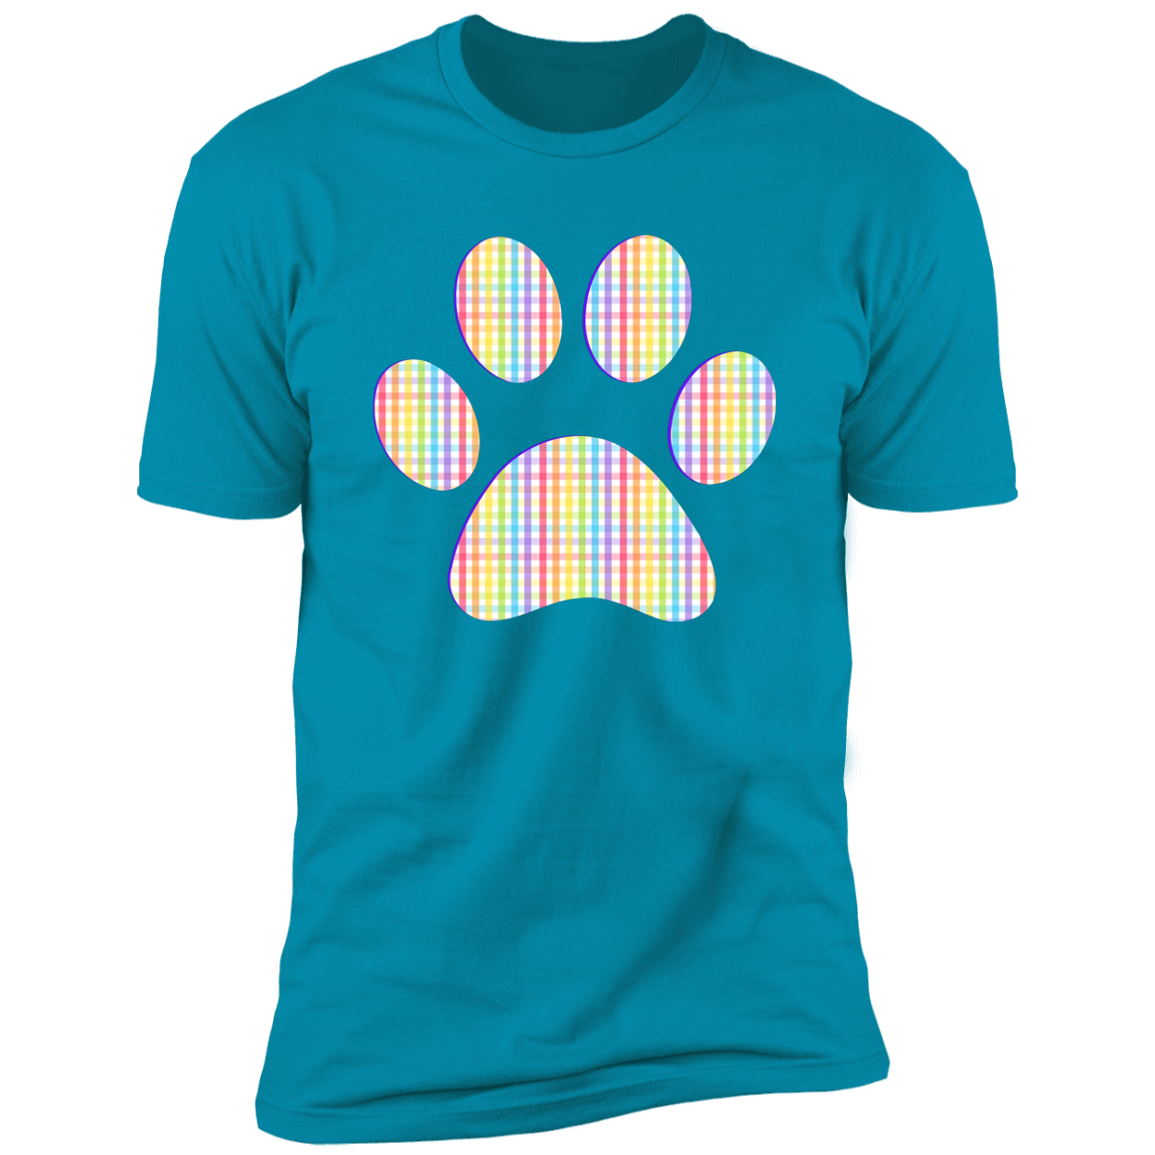 Pride Paw (Gingham) Pride T-shirt, Paw Pride Dog Shirt for humans, in turquoise 